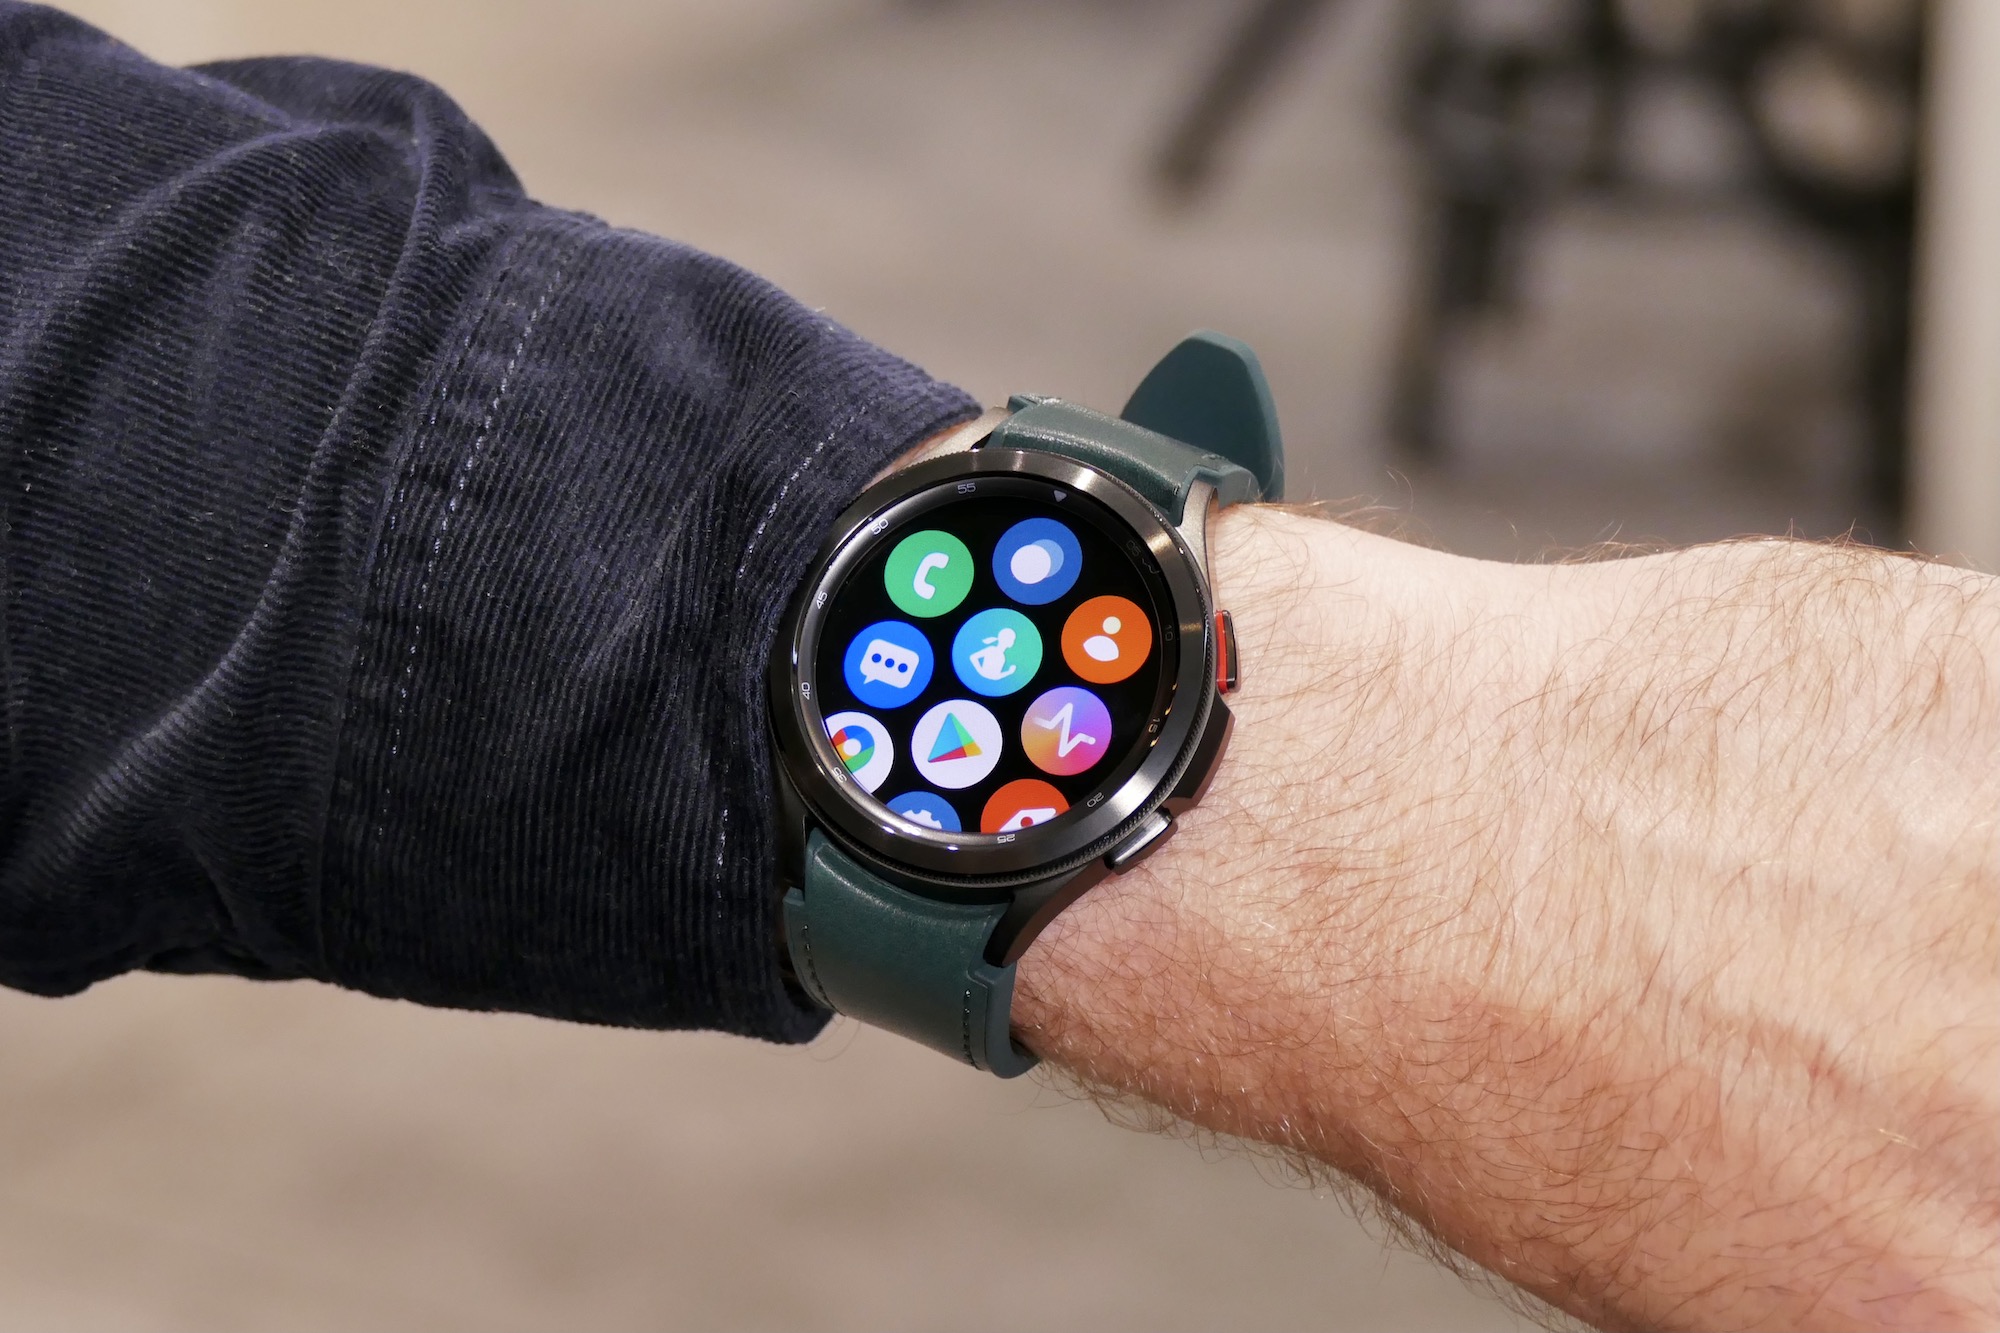 Samsung Galaxy Watch 4 hands-on: Faster, and packed with health features 